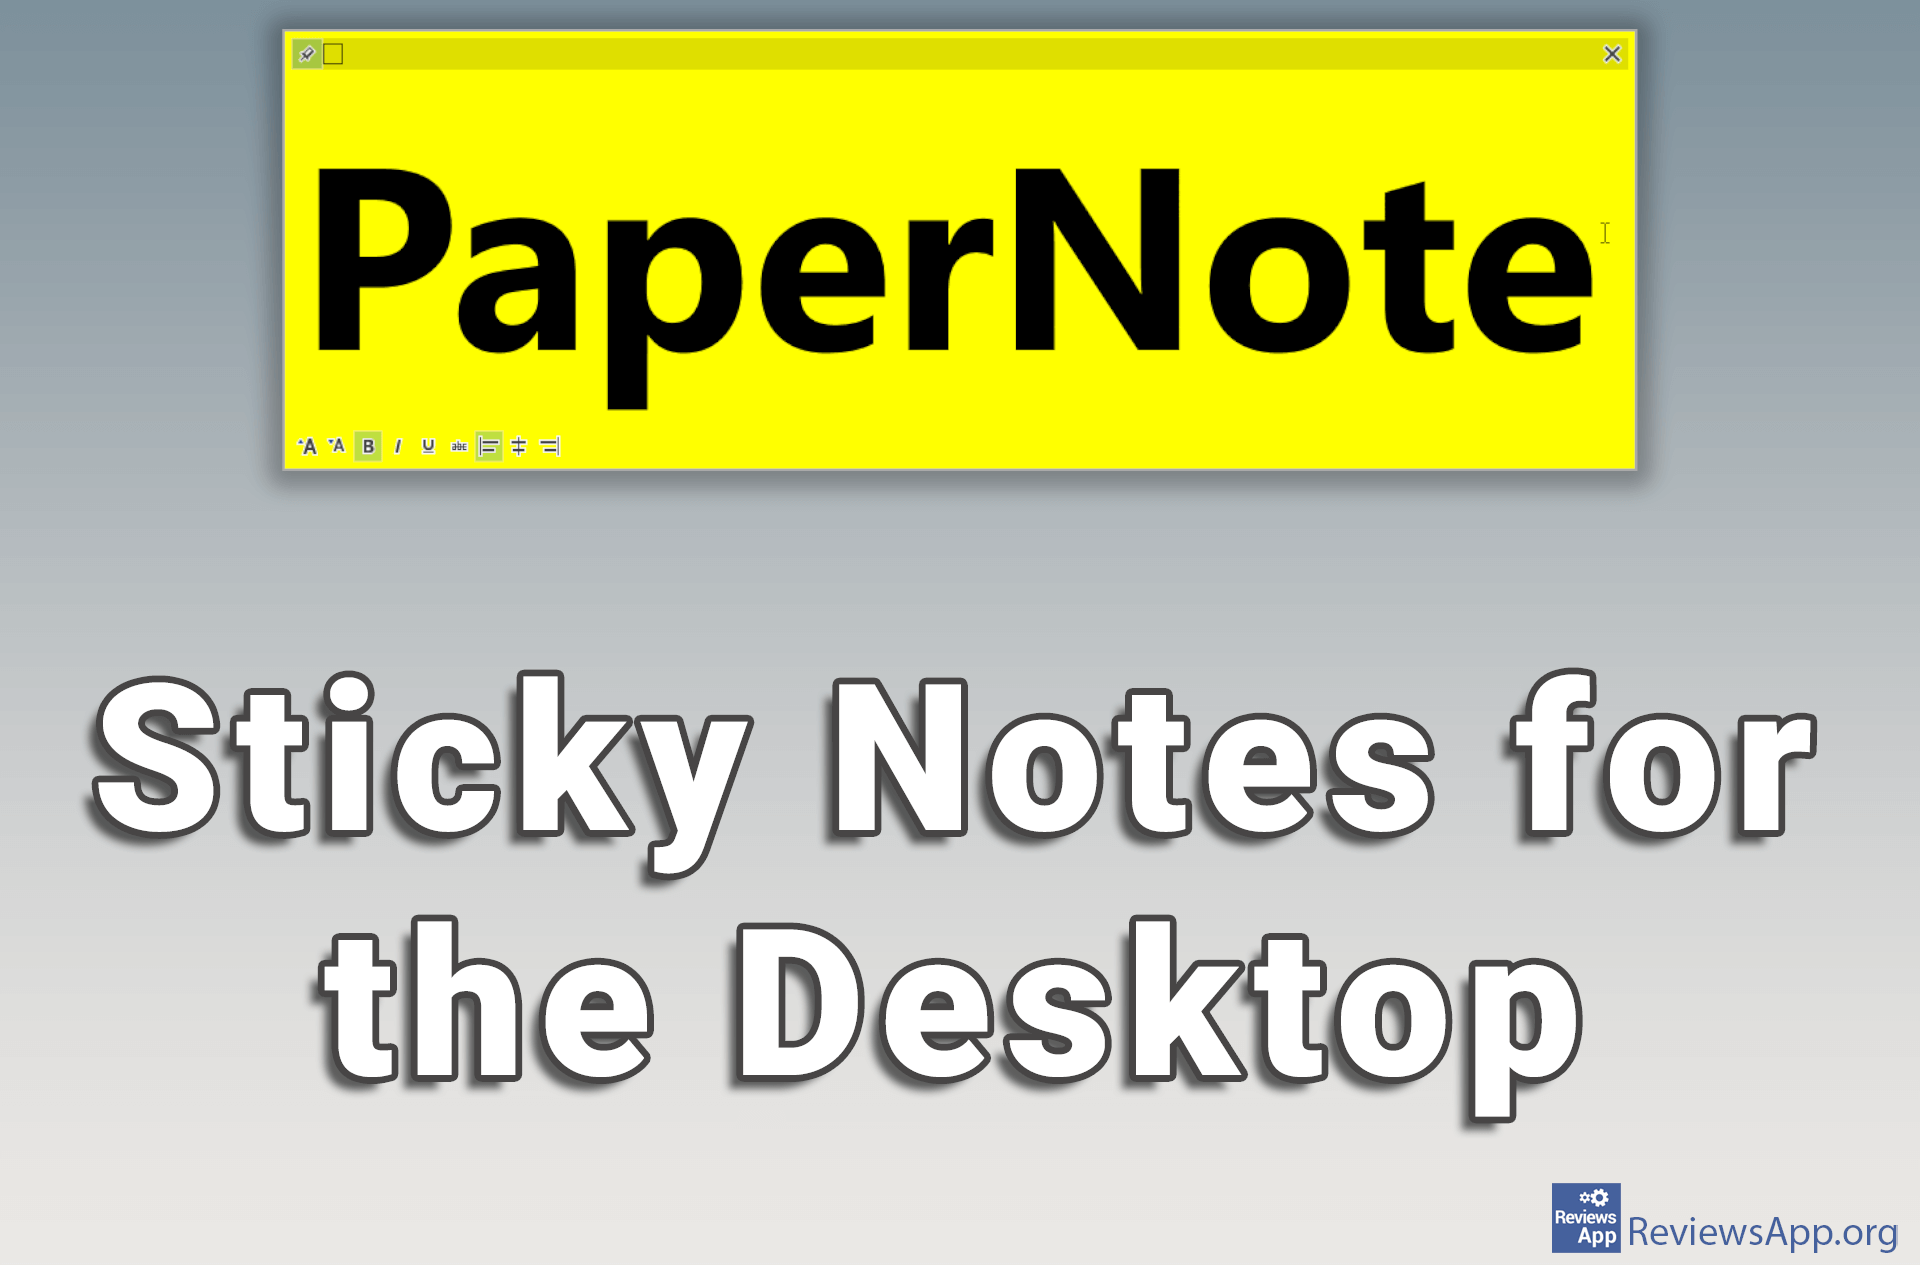 PeperNote – Sticky Notes for the Desktop